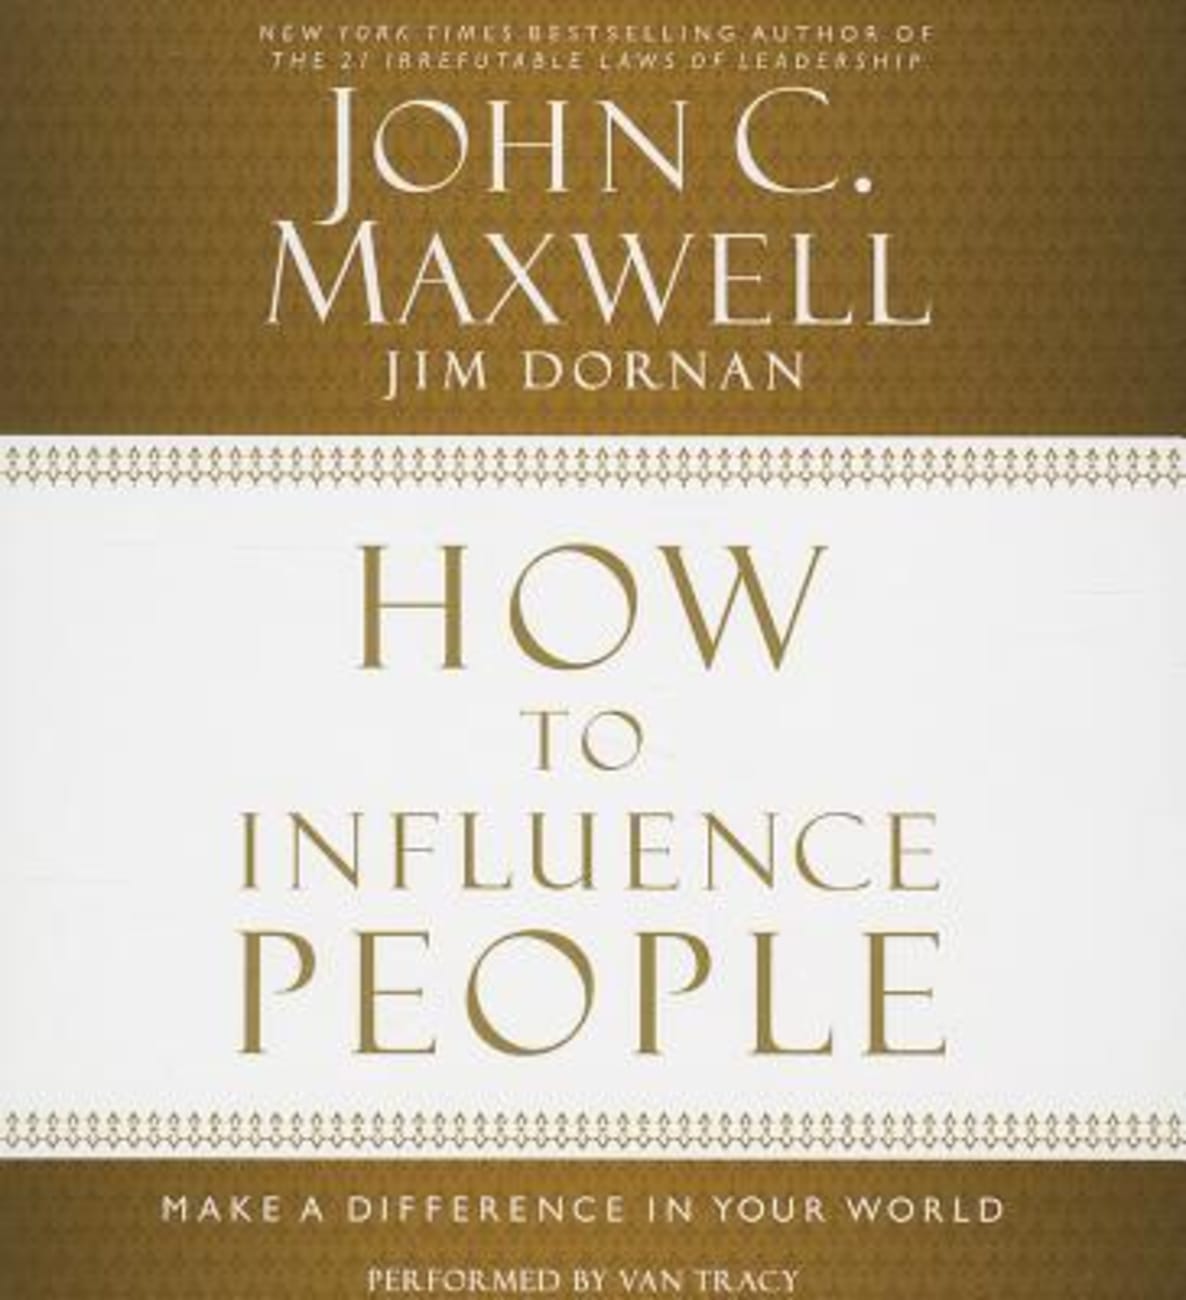 How to Influence People (Unabridged, 5 Cds) CD